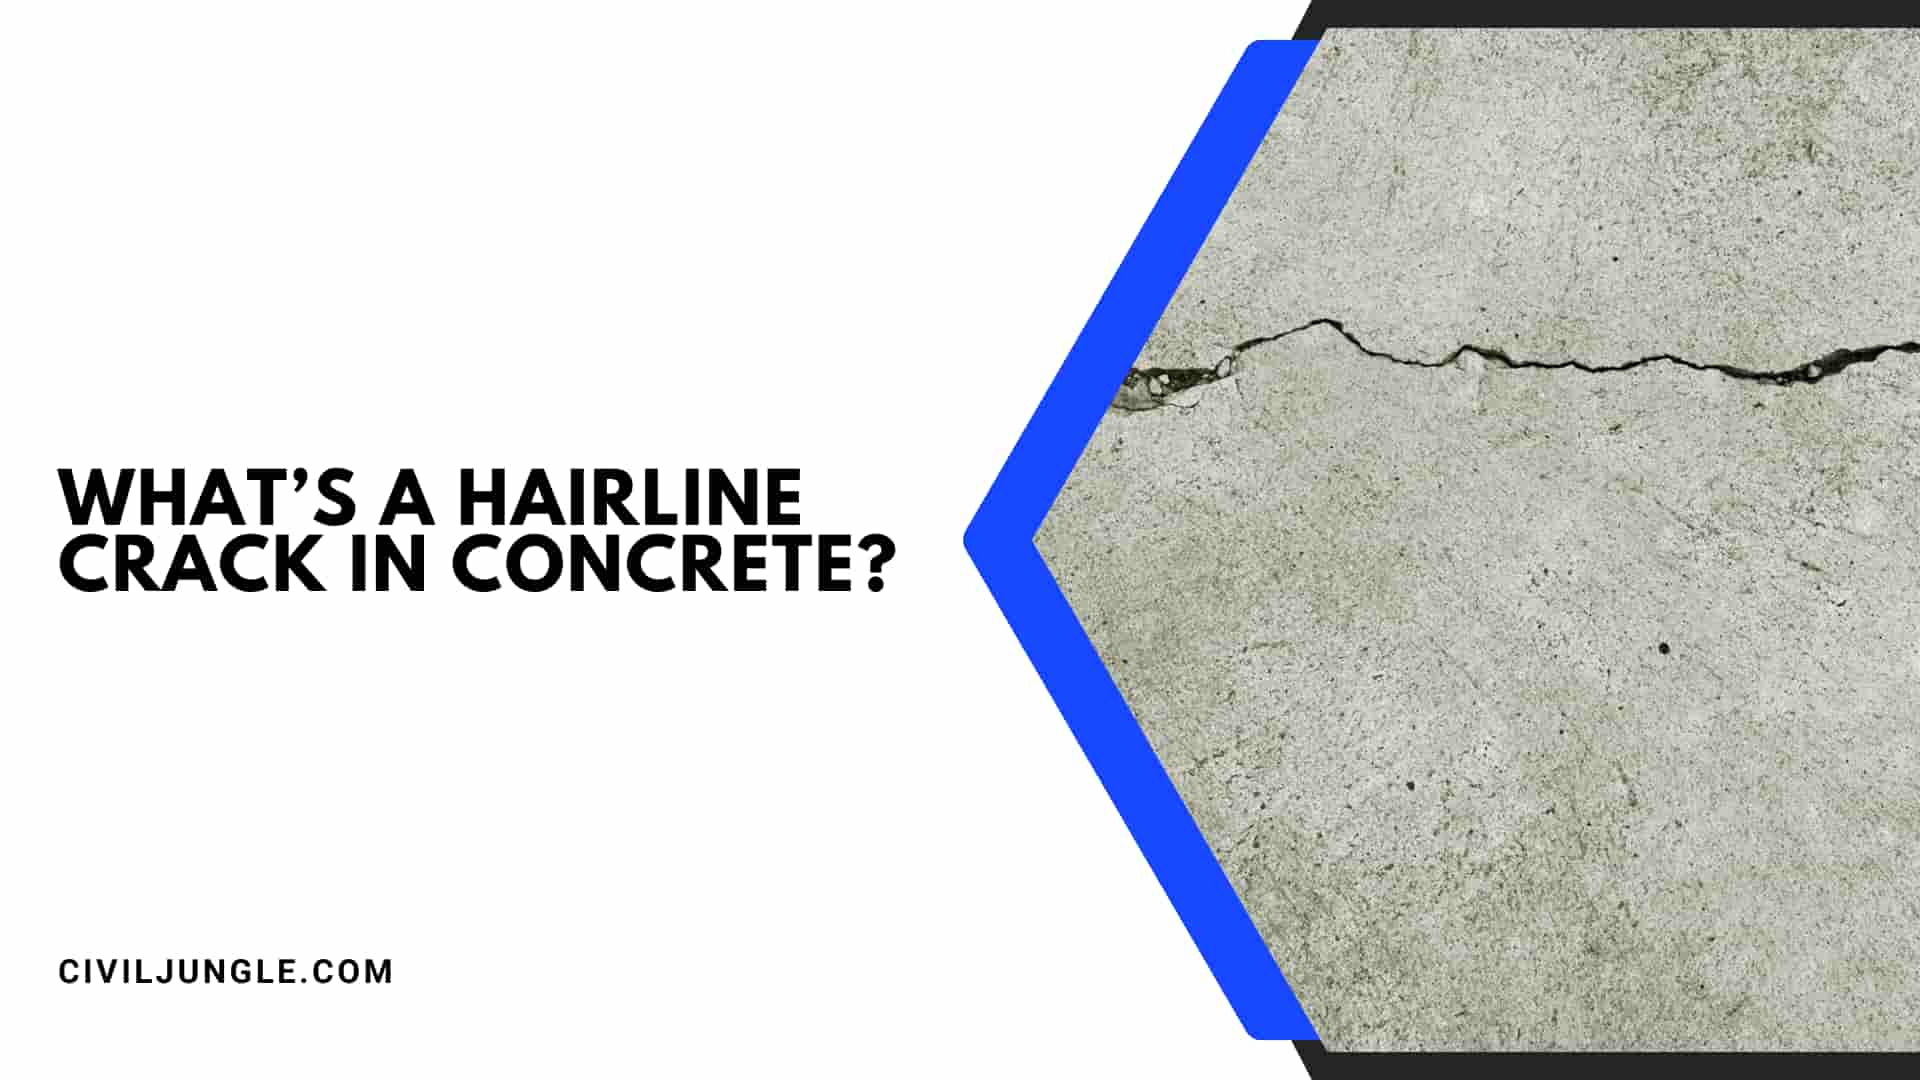 What’s A Hairline Crack In Concrete?